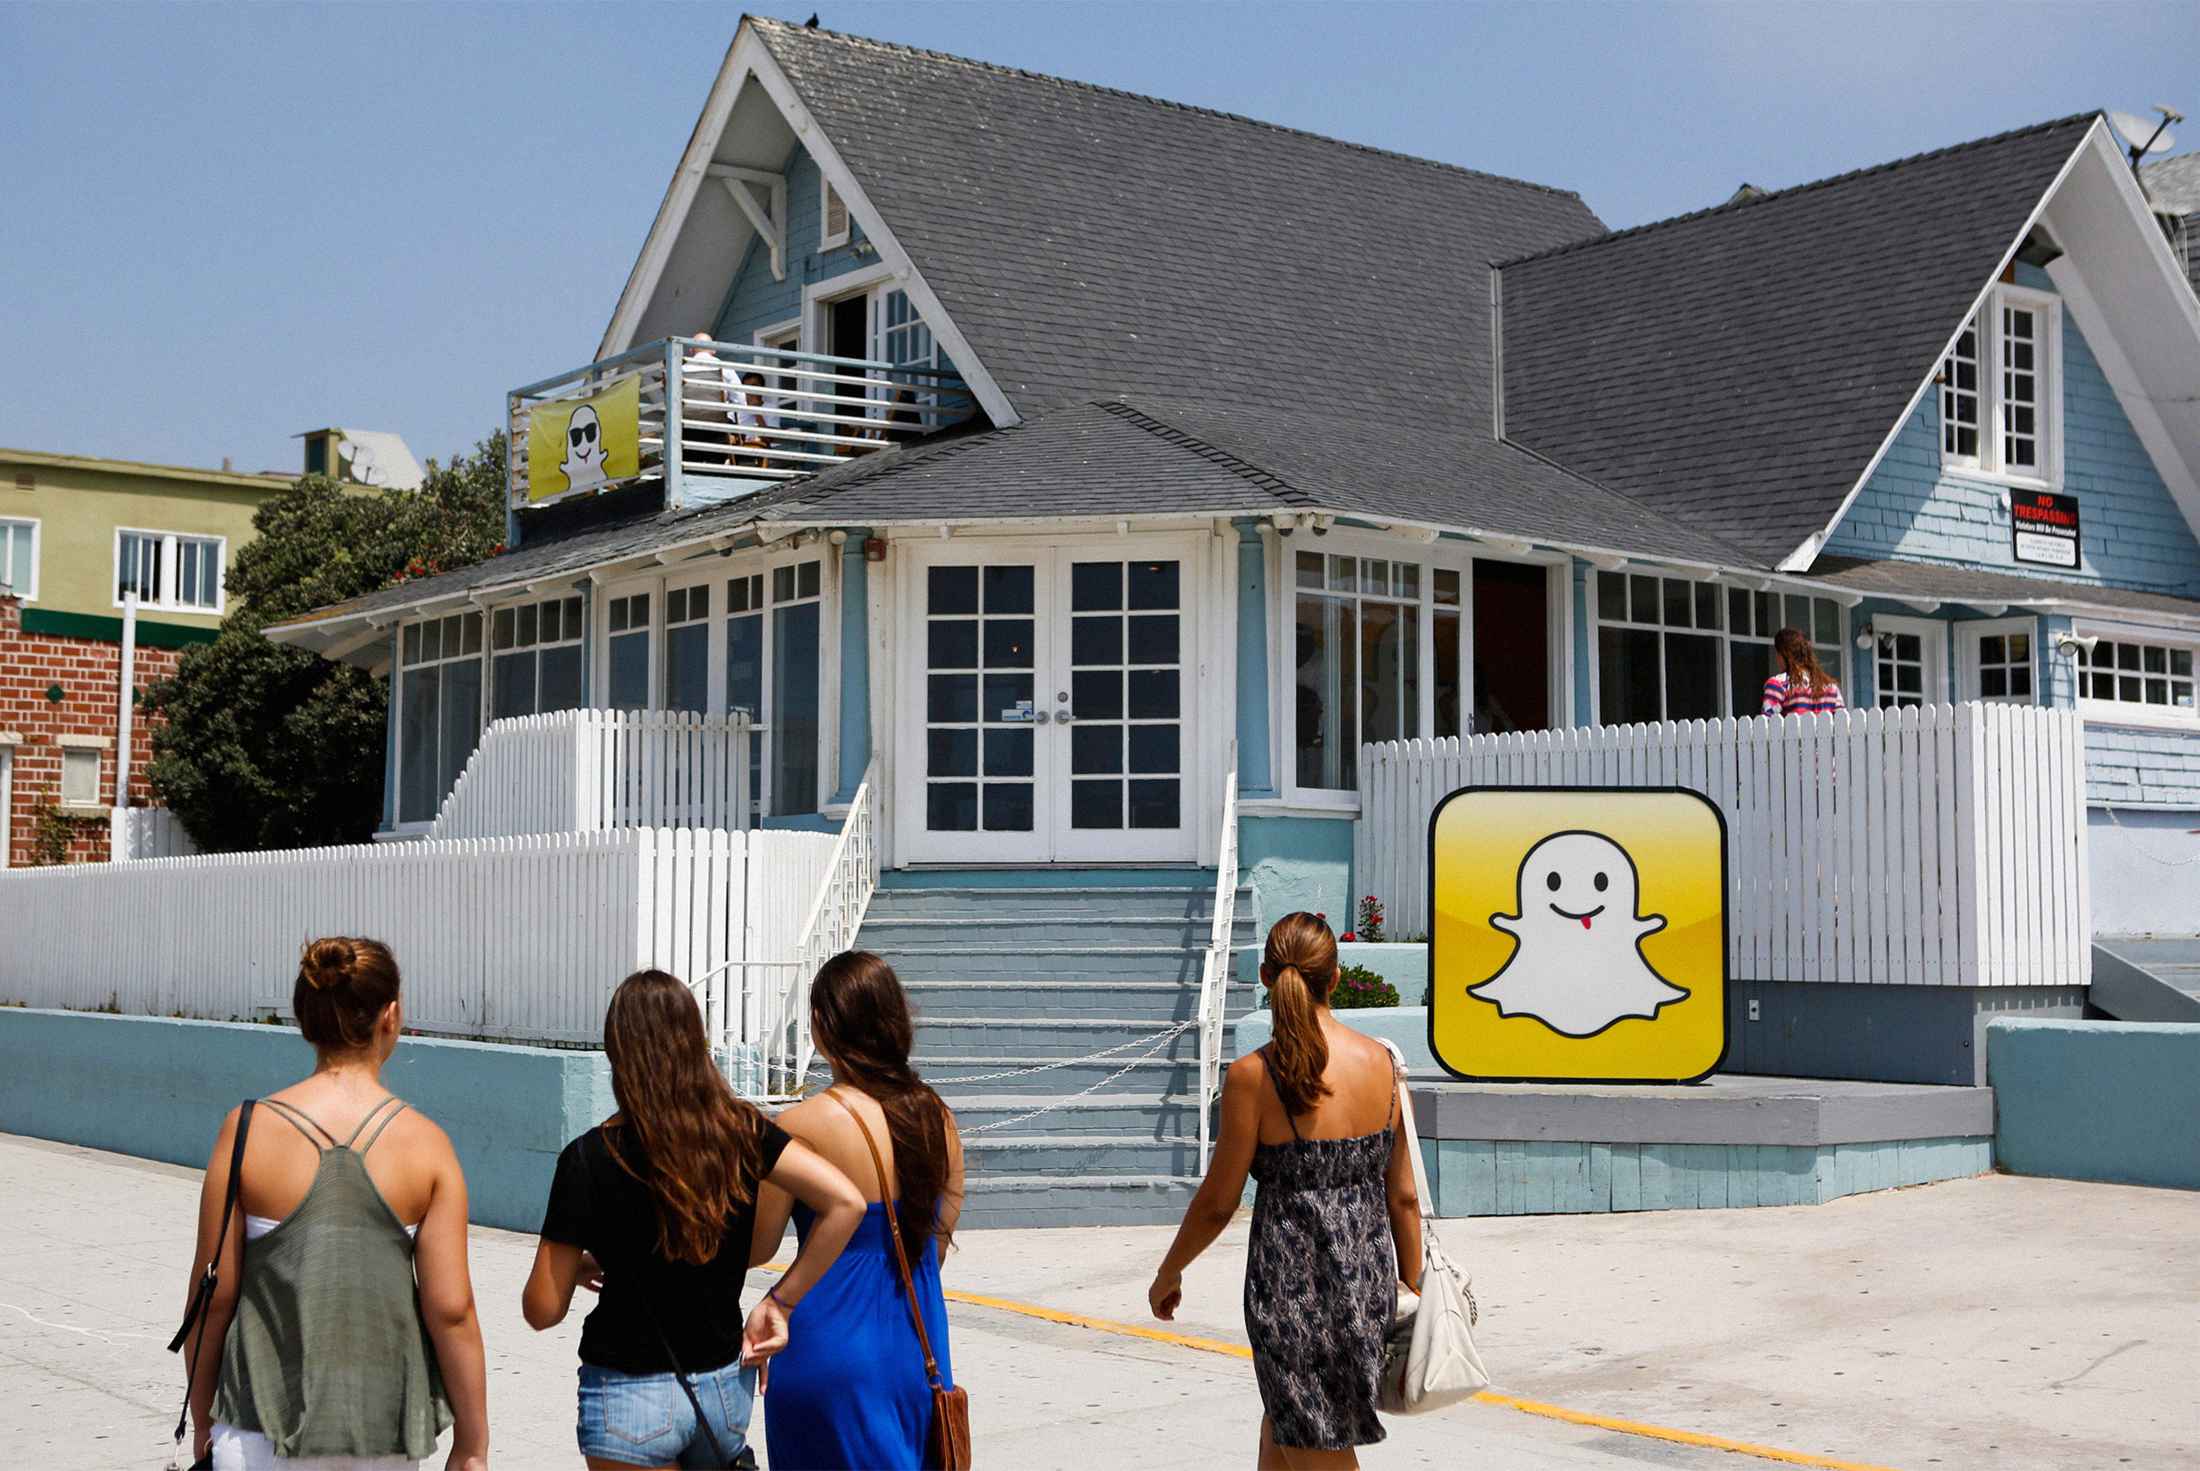 Homemade Forced Porn - Snapchat Has a Child-Porn Problem - Bloomberg